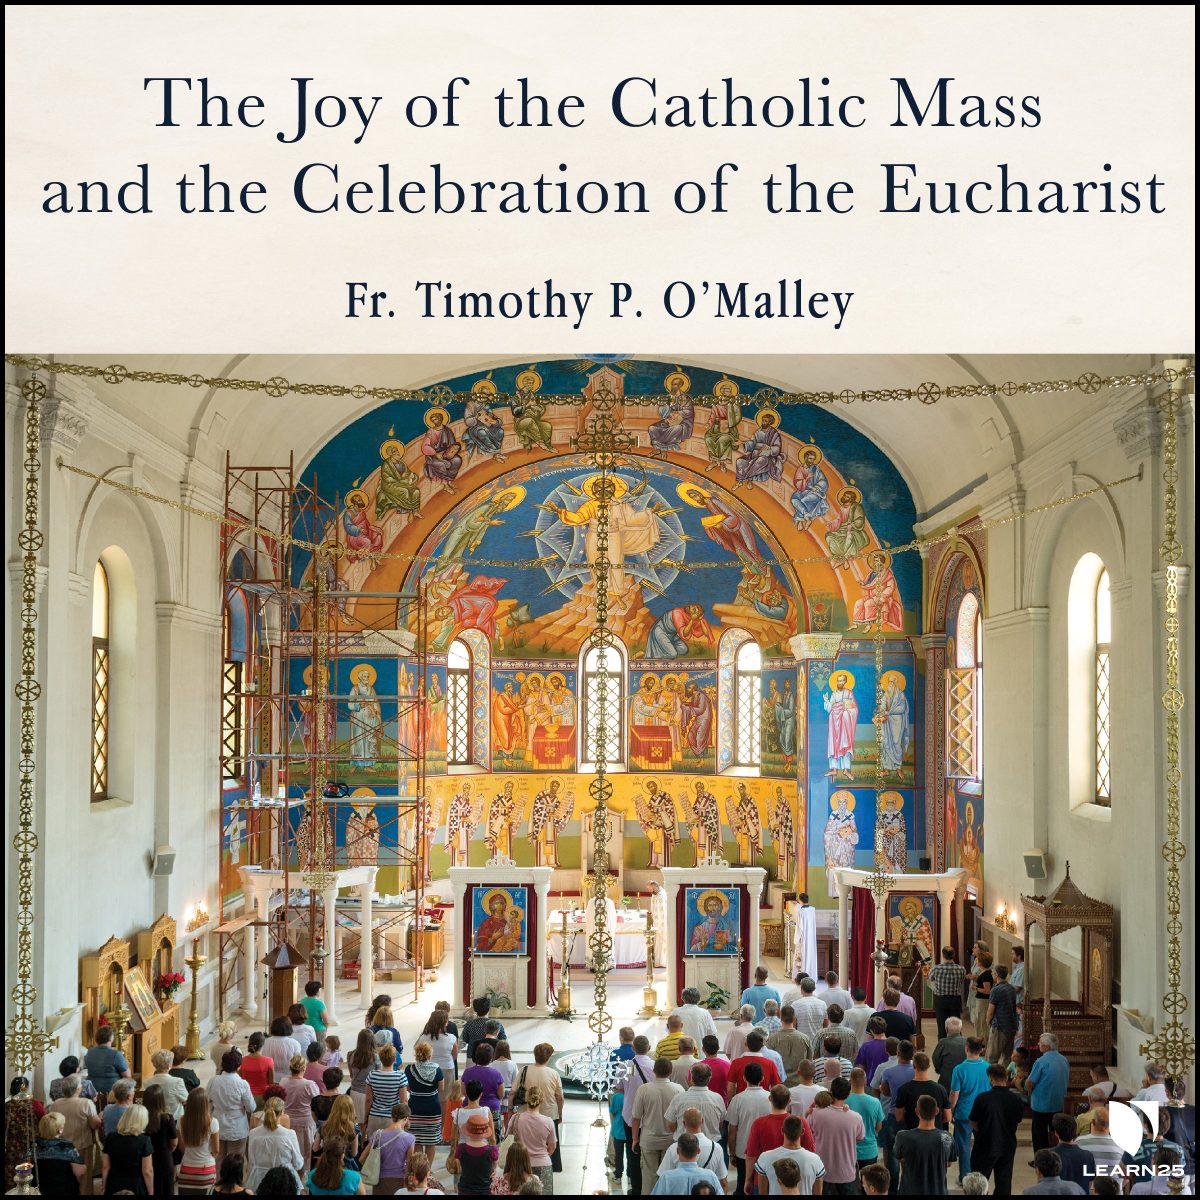 The Joy of the Catholic Mass and the Celebration of Eucharist LEARN25